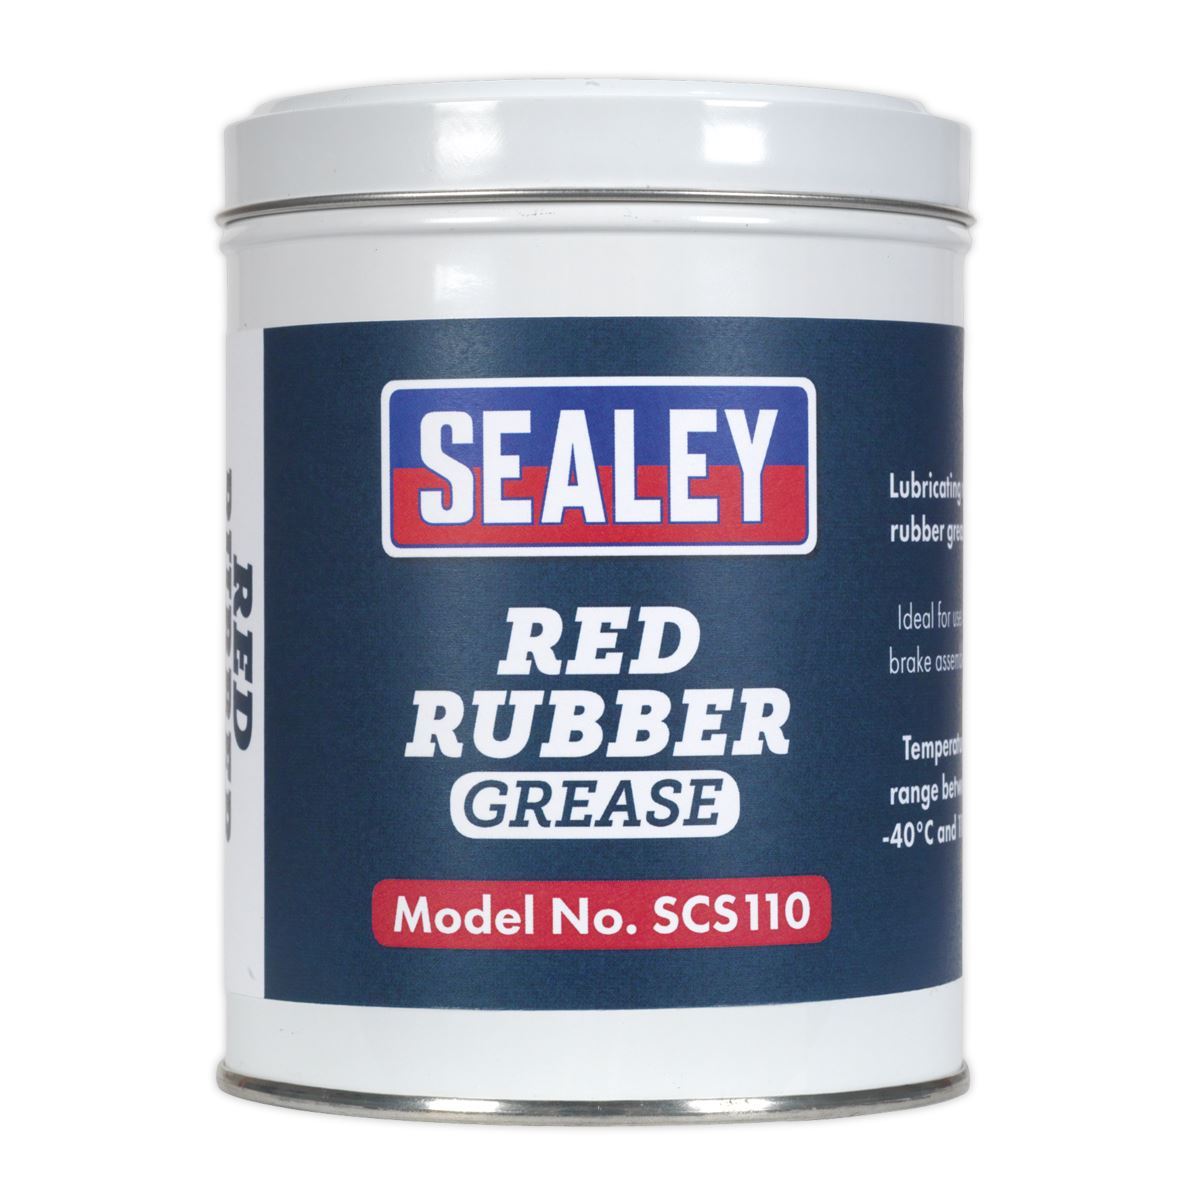 Sealey Red Rubber Grease 500g Tin